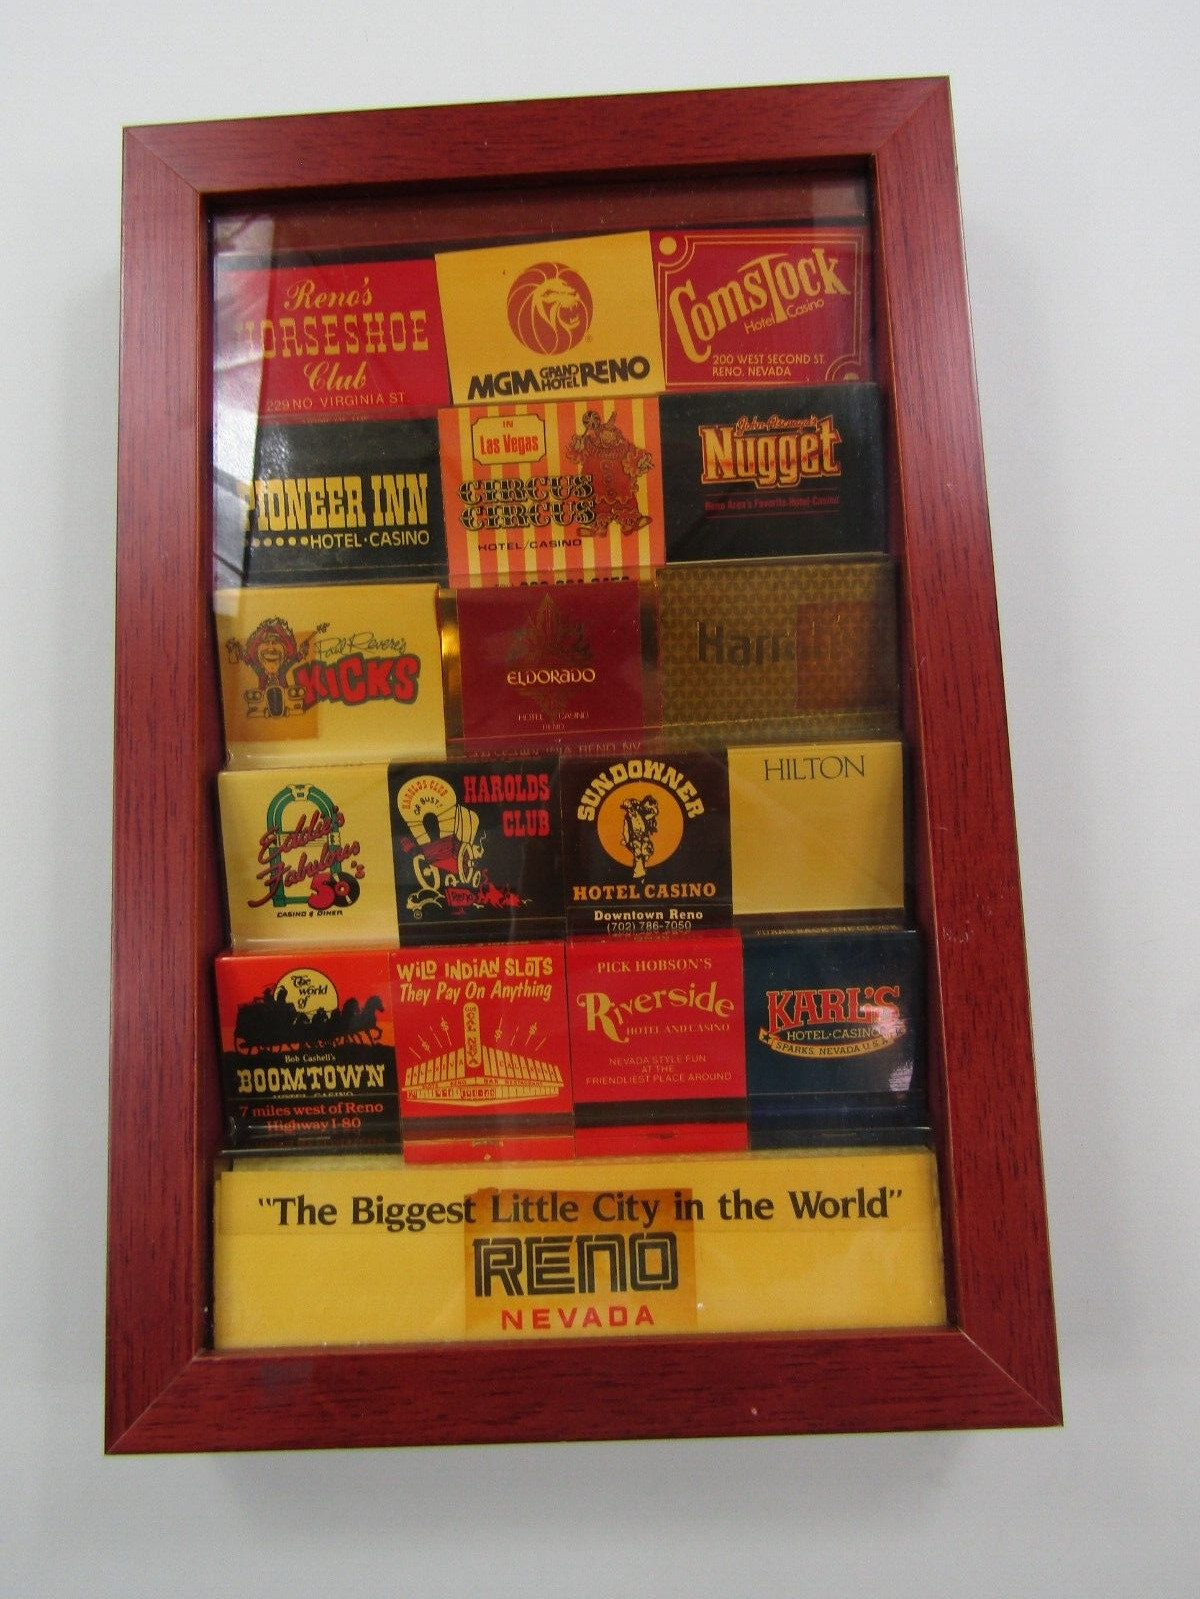 VTG Reno Nevada Framed Matchbook Collection The Biggest Little City in the World